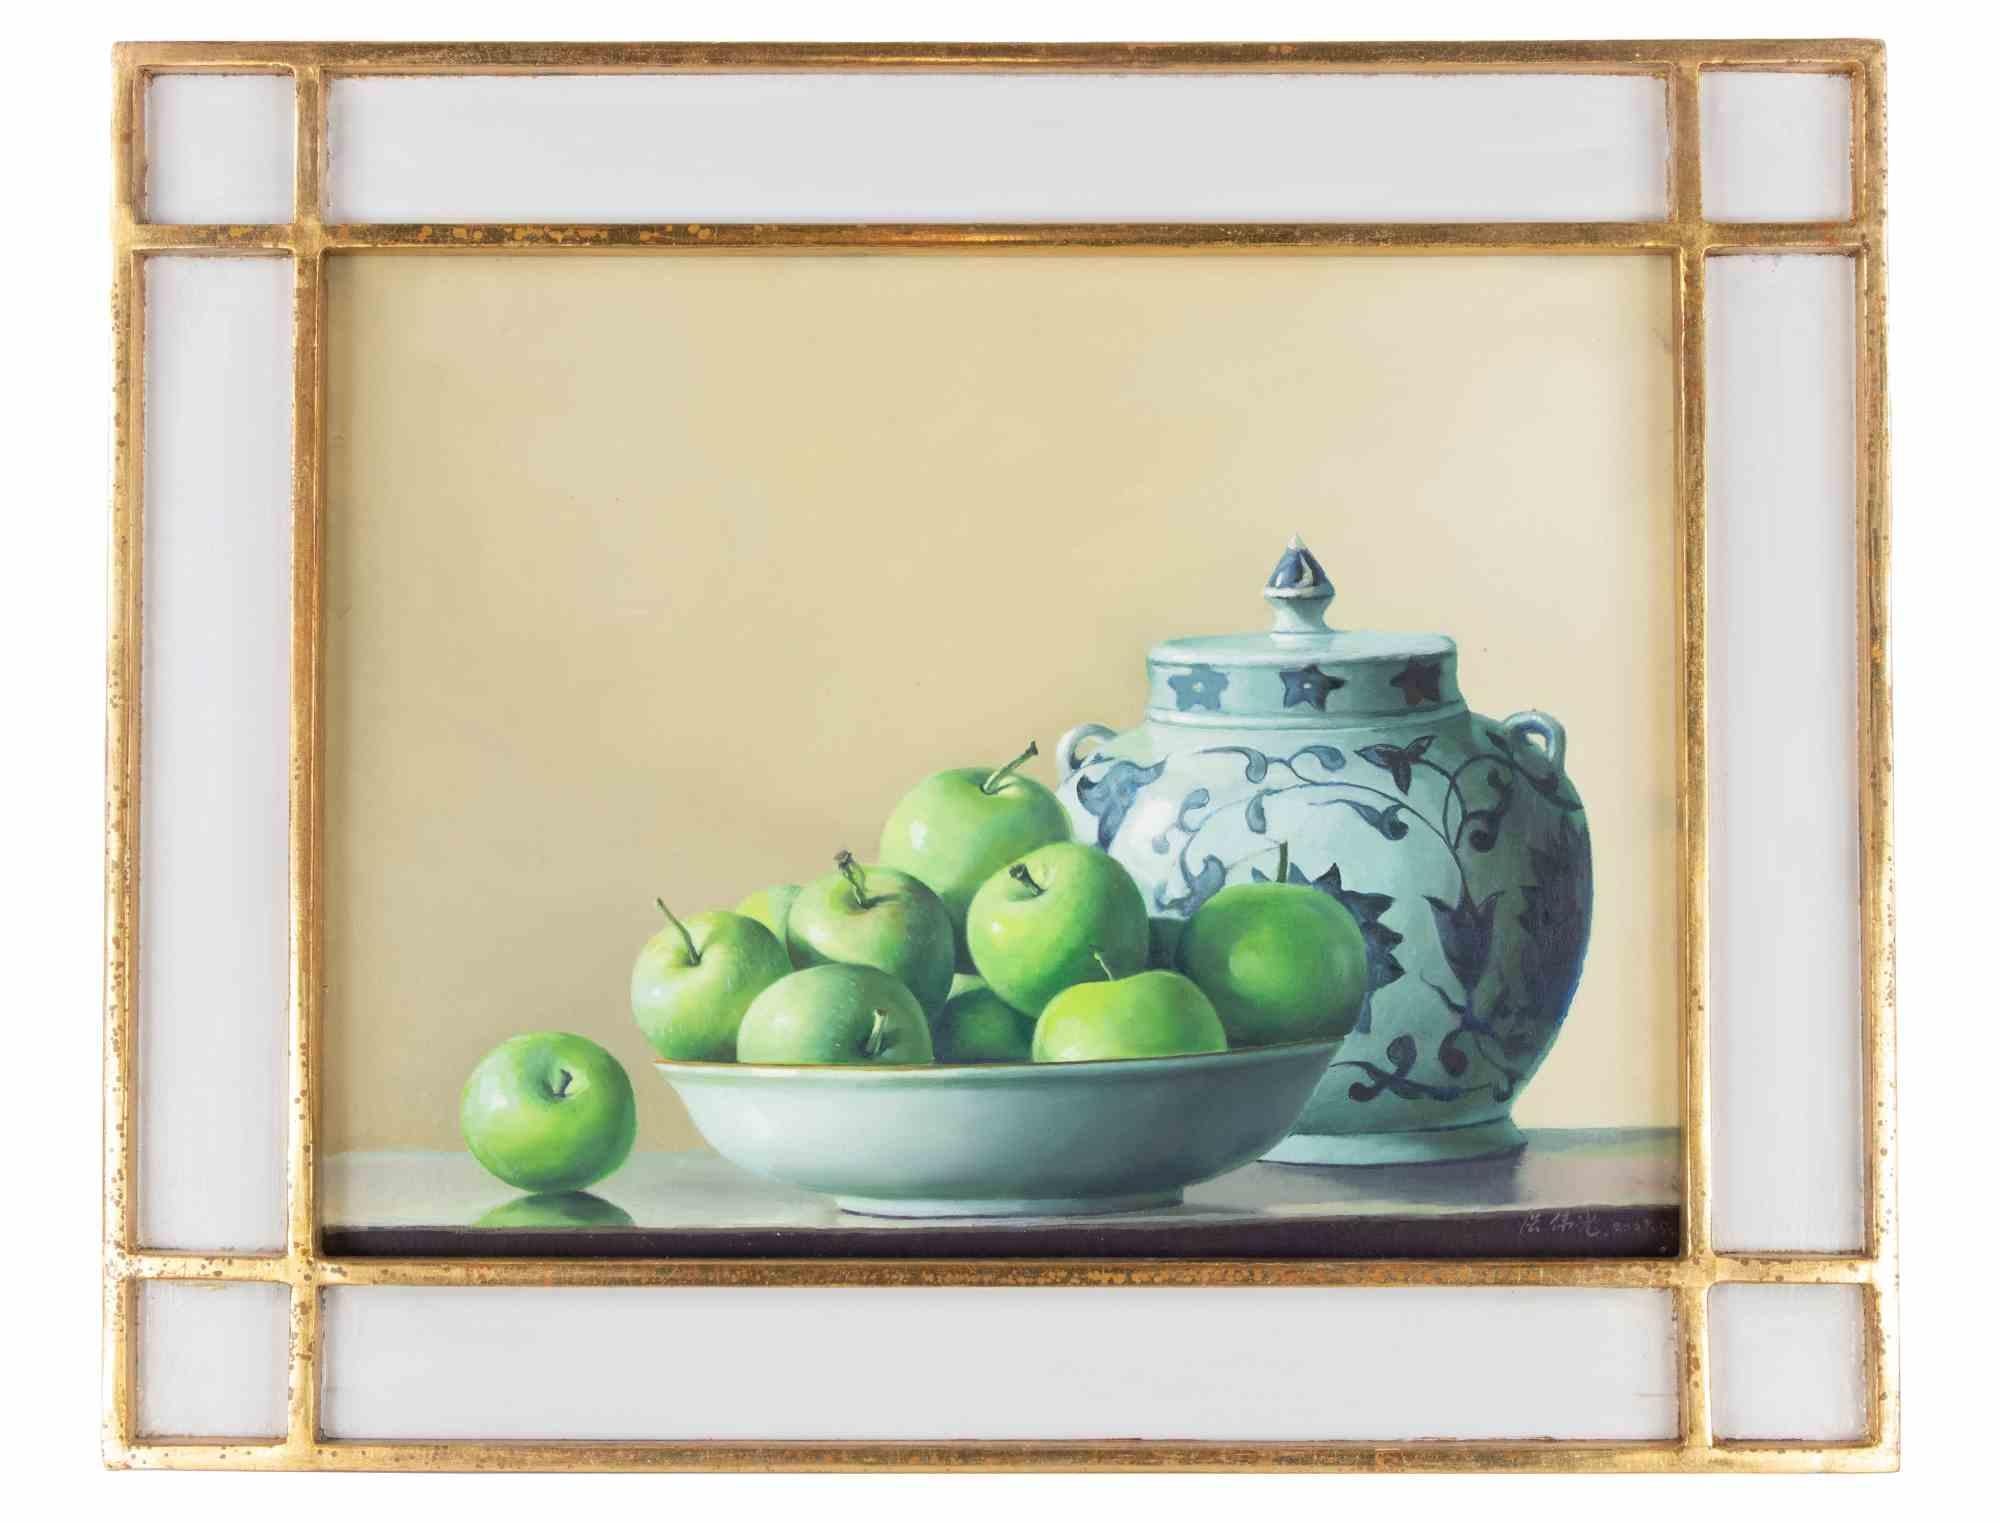 Still Life is an oil painting realized in 2006 by Zhang Wei Guang (Mirror).

Beautiful oil painting on canvas. 

Includes frame: 40 x 50 cm

Hand-signed and dated on the lower margin

Zhang Wei Guang , also called ‘mirror' was born in Helong Jang,